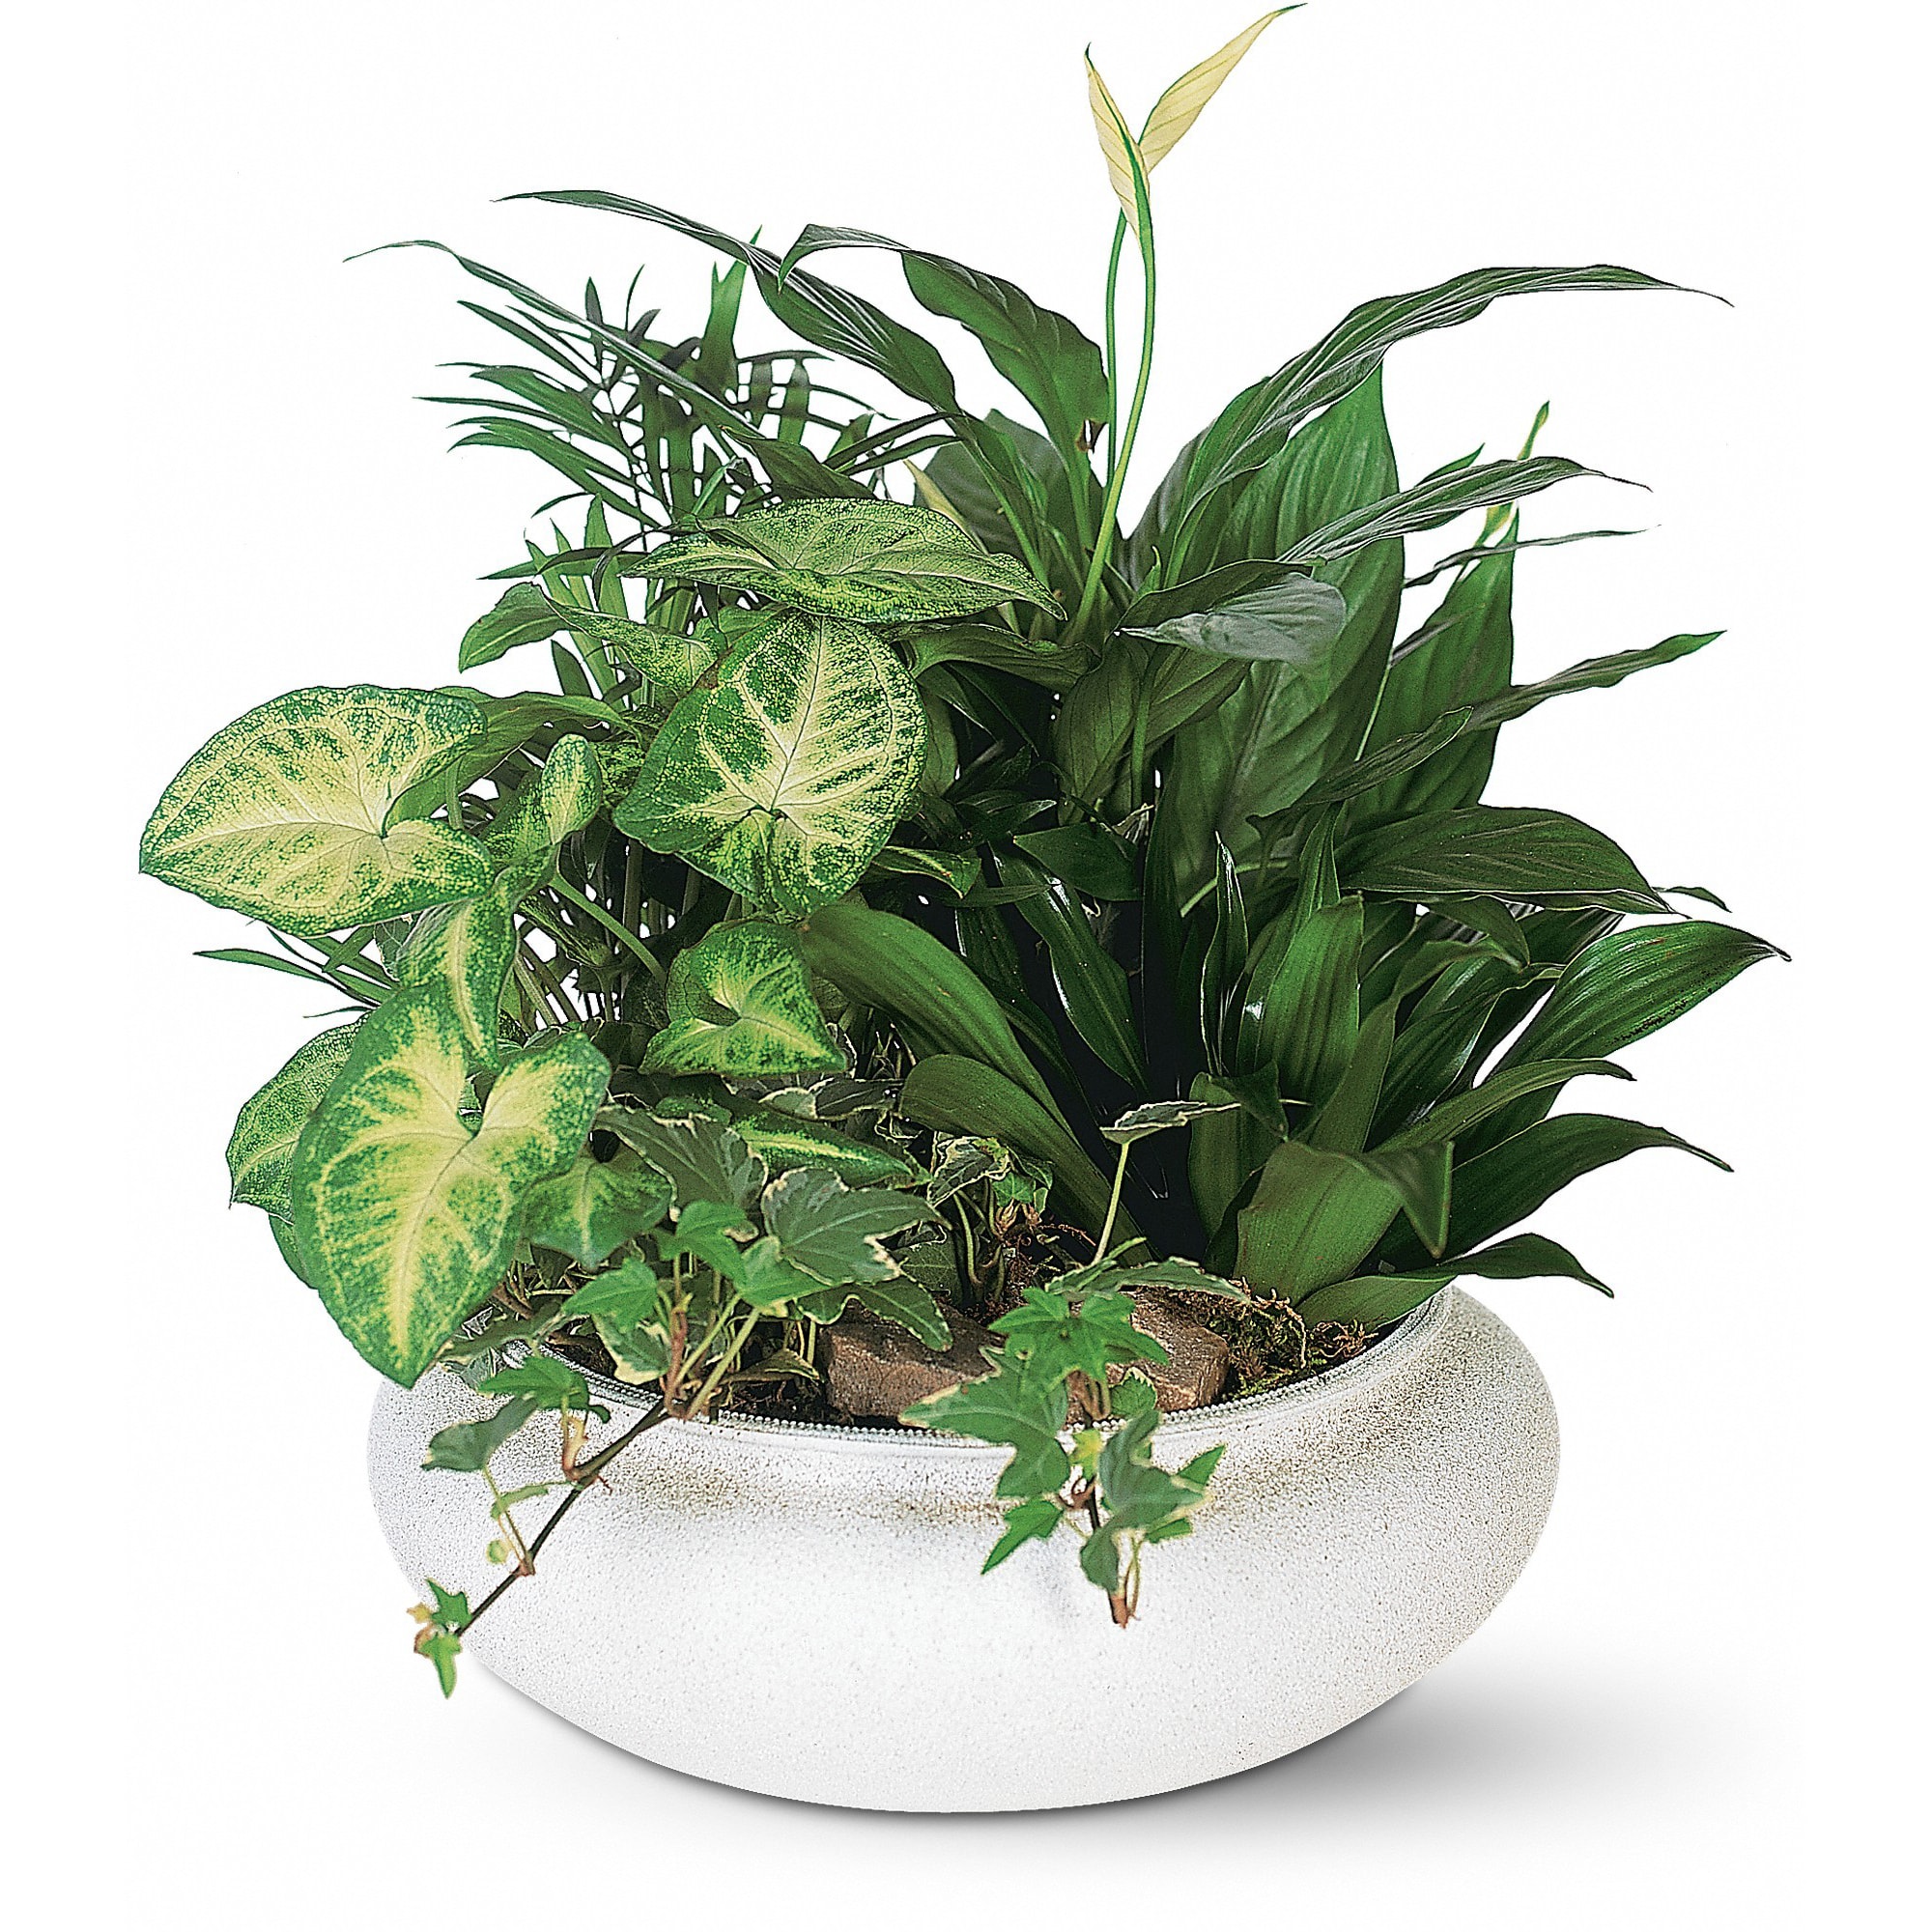 Medium Dish Garden - This low bowl filled with living plants will also carry comfort and compassion for many months to come. Perfect to send to the home or service. 